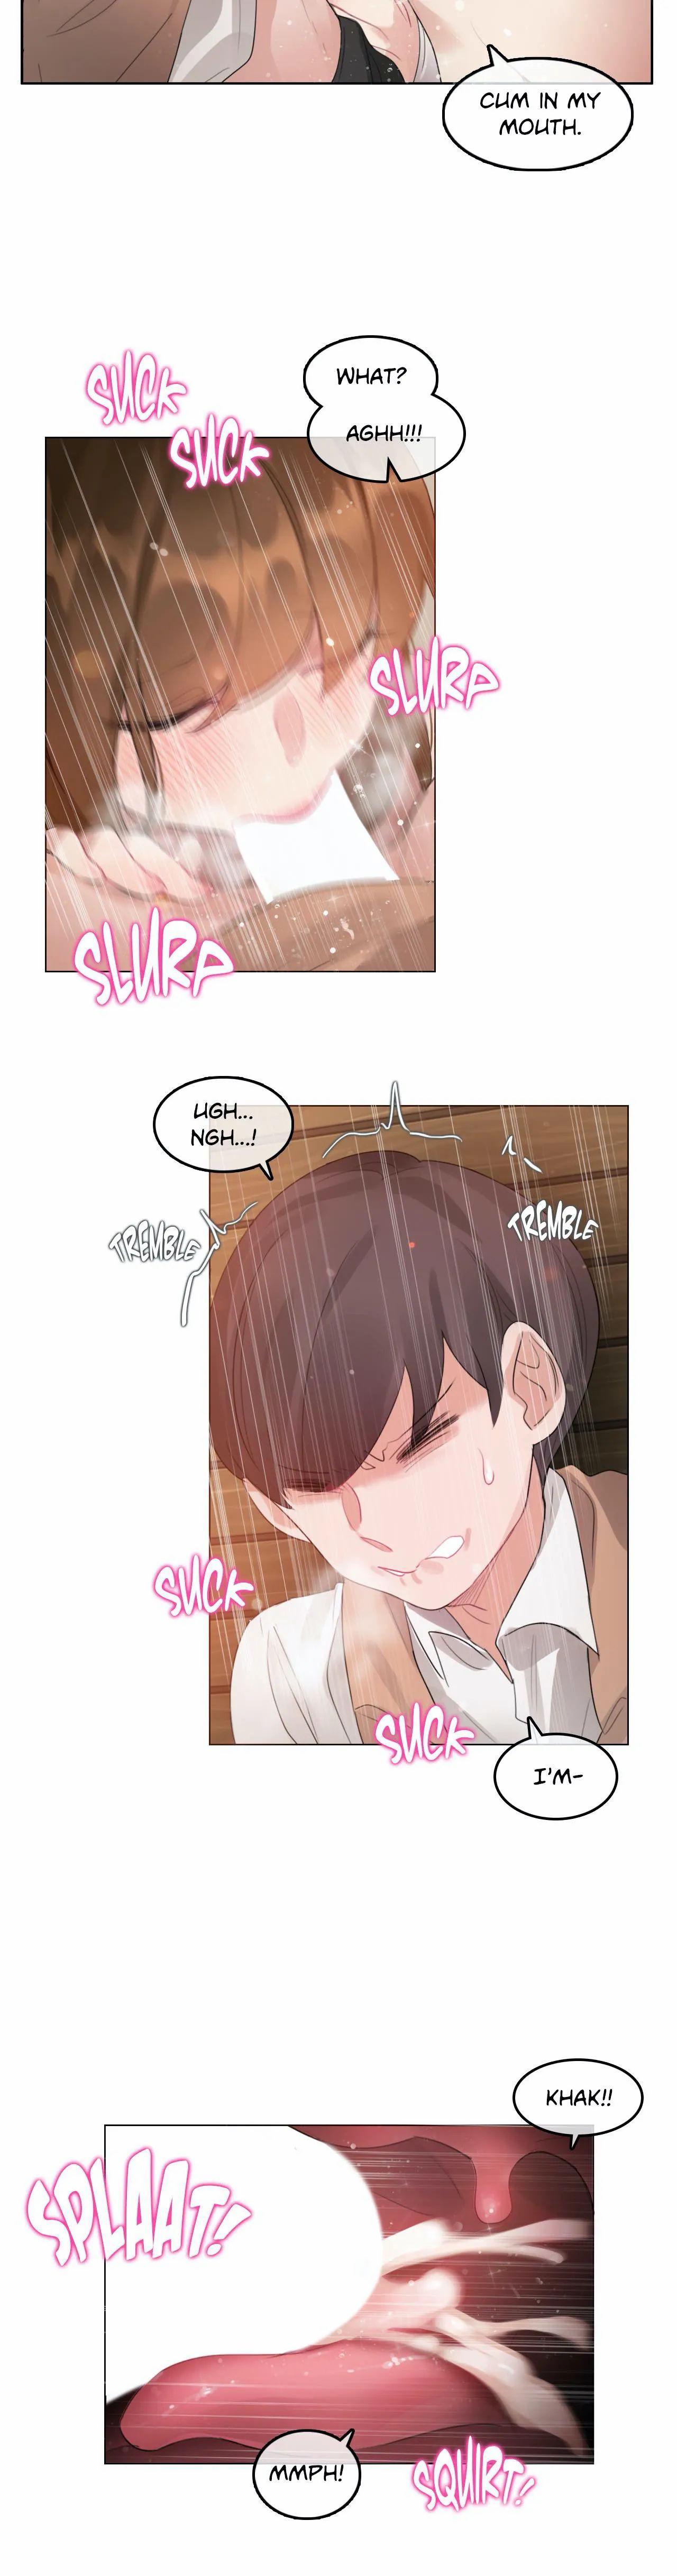 Perverts' Daily Lives Episode 1: Her Secret Recipe Ch1-19 152